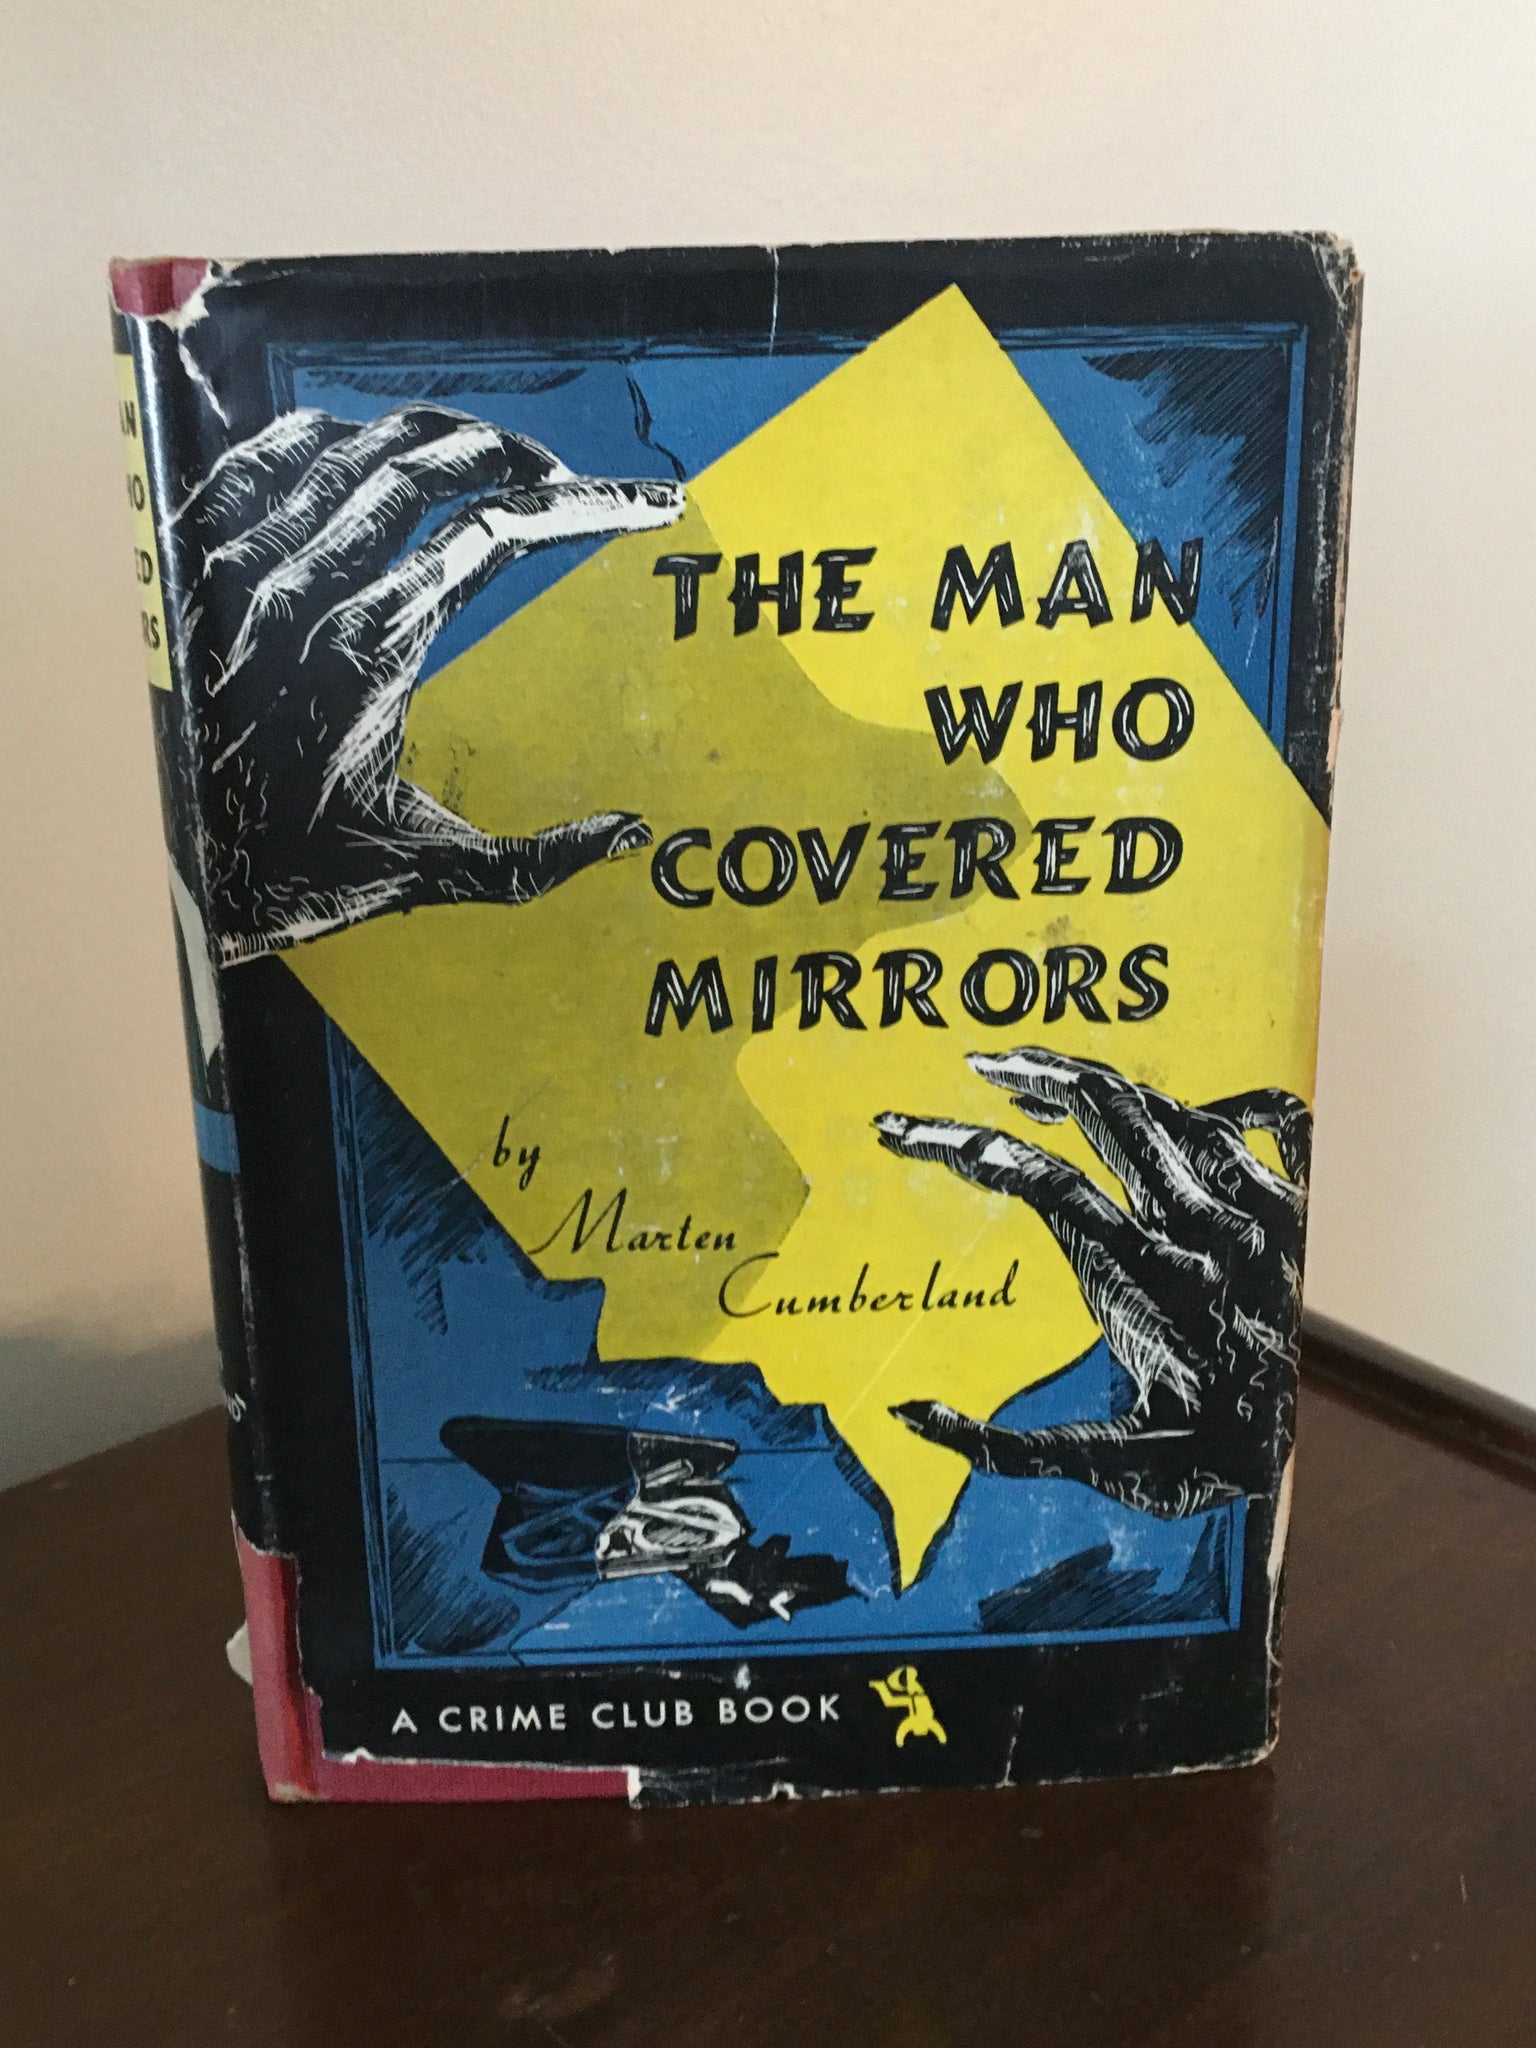 The Man Who Covered Mirrors